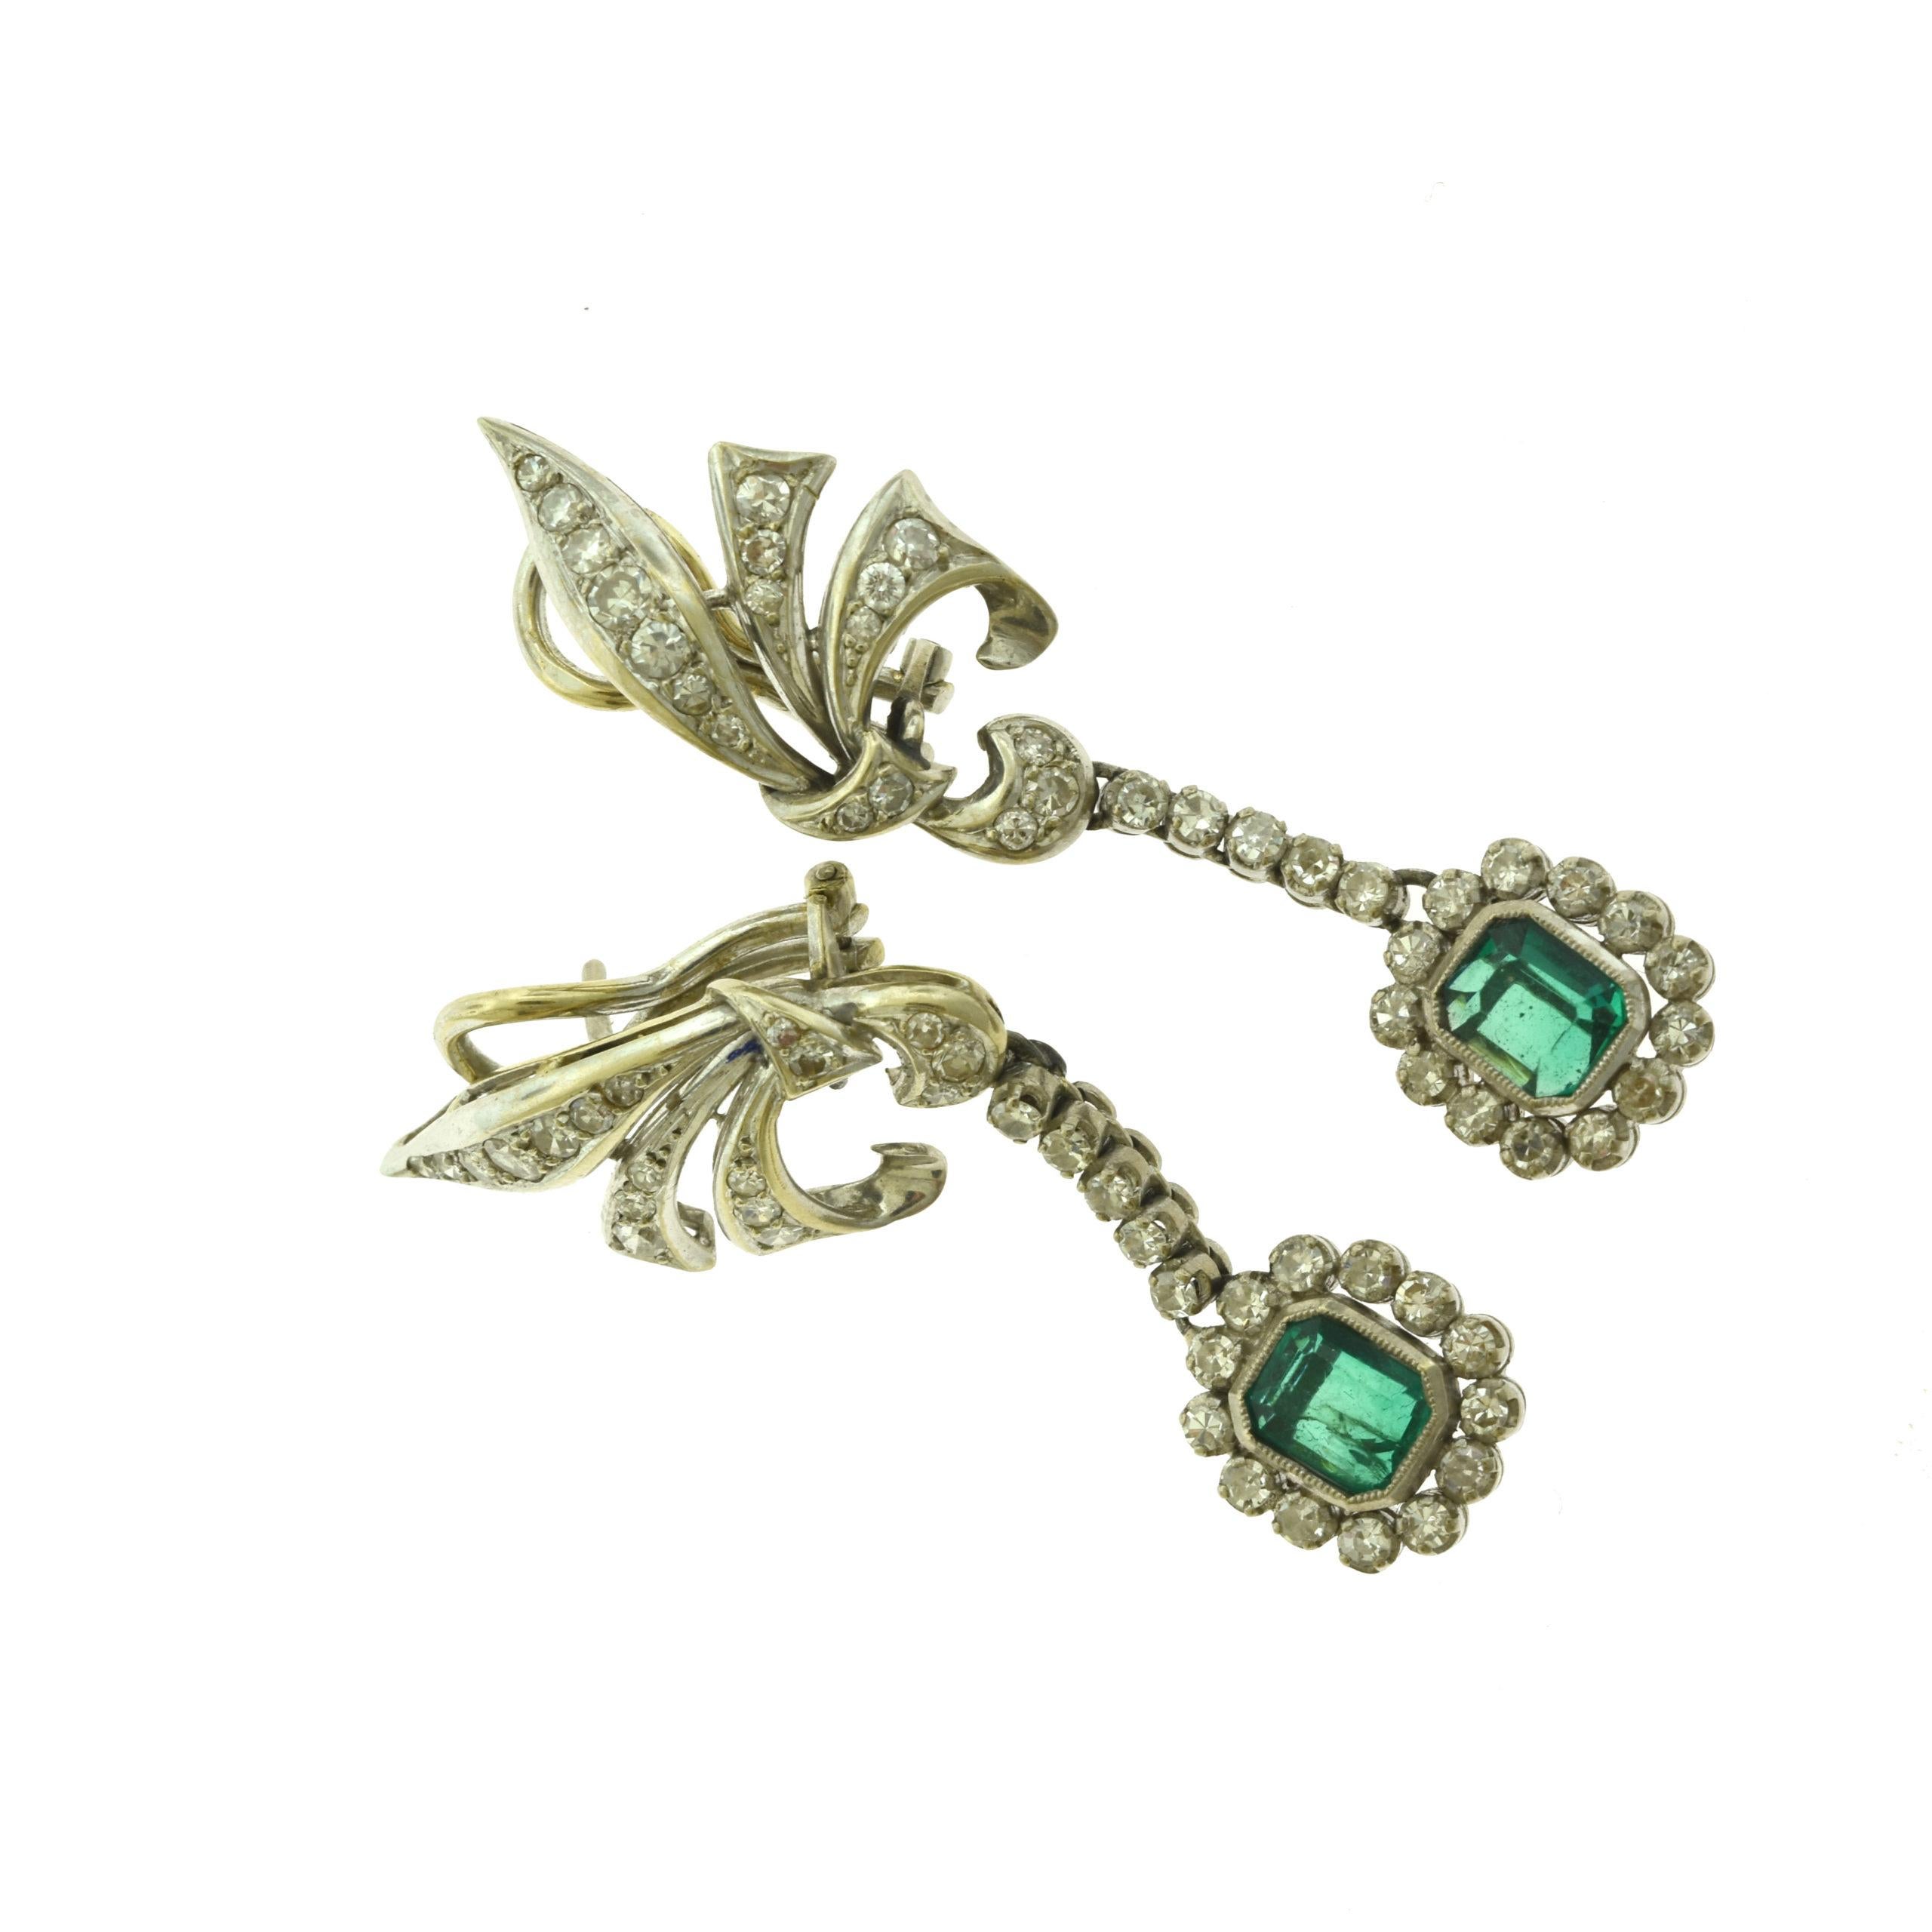 Brilliance Jewels, Miami
Questions? Call Us Anytime!
786,482,8100

Style: Dangle Earrings

Theme: Swirl

Metal: White Gold

Metal Purity: 18k

Stones: 36 Round Brilliant Diamonds

                  2 Emerald cut Emeralds

                 

Total